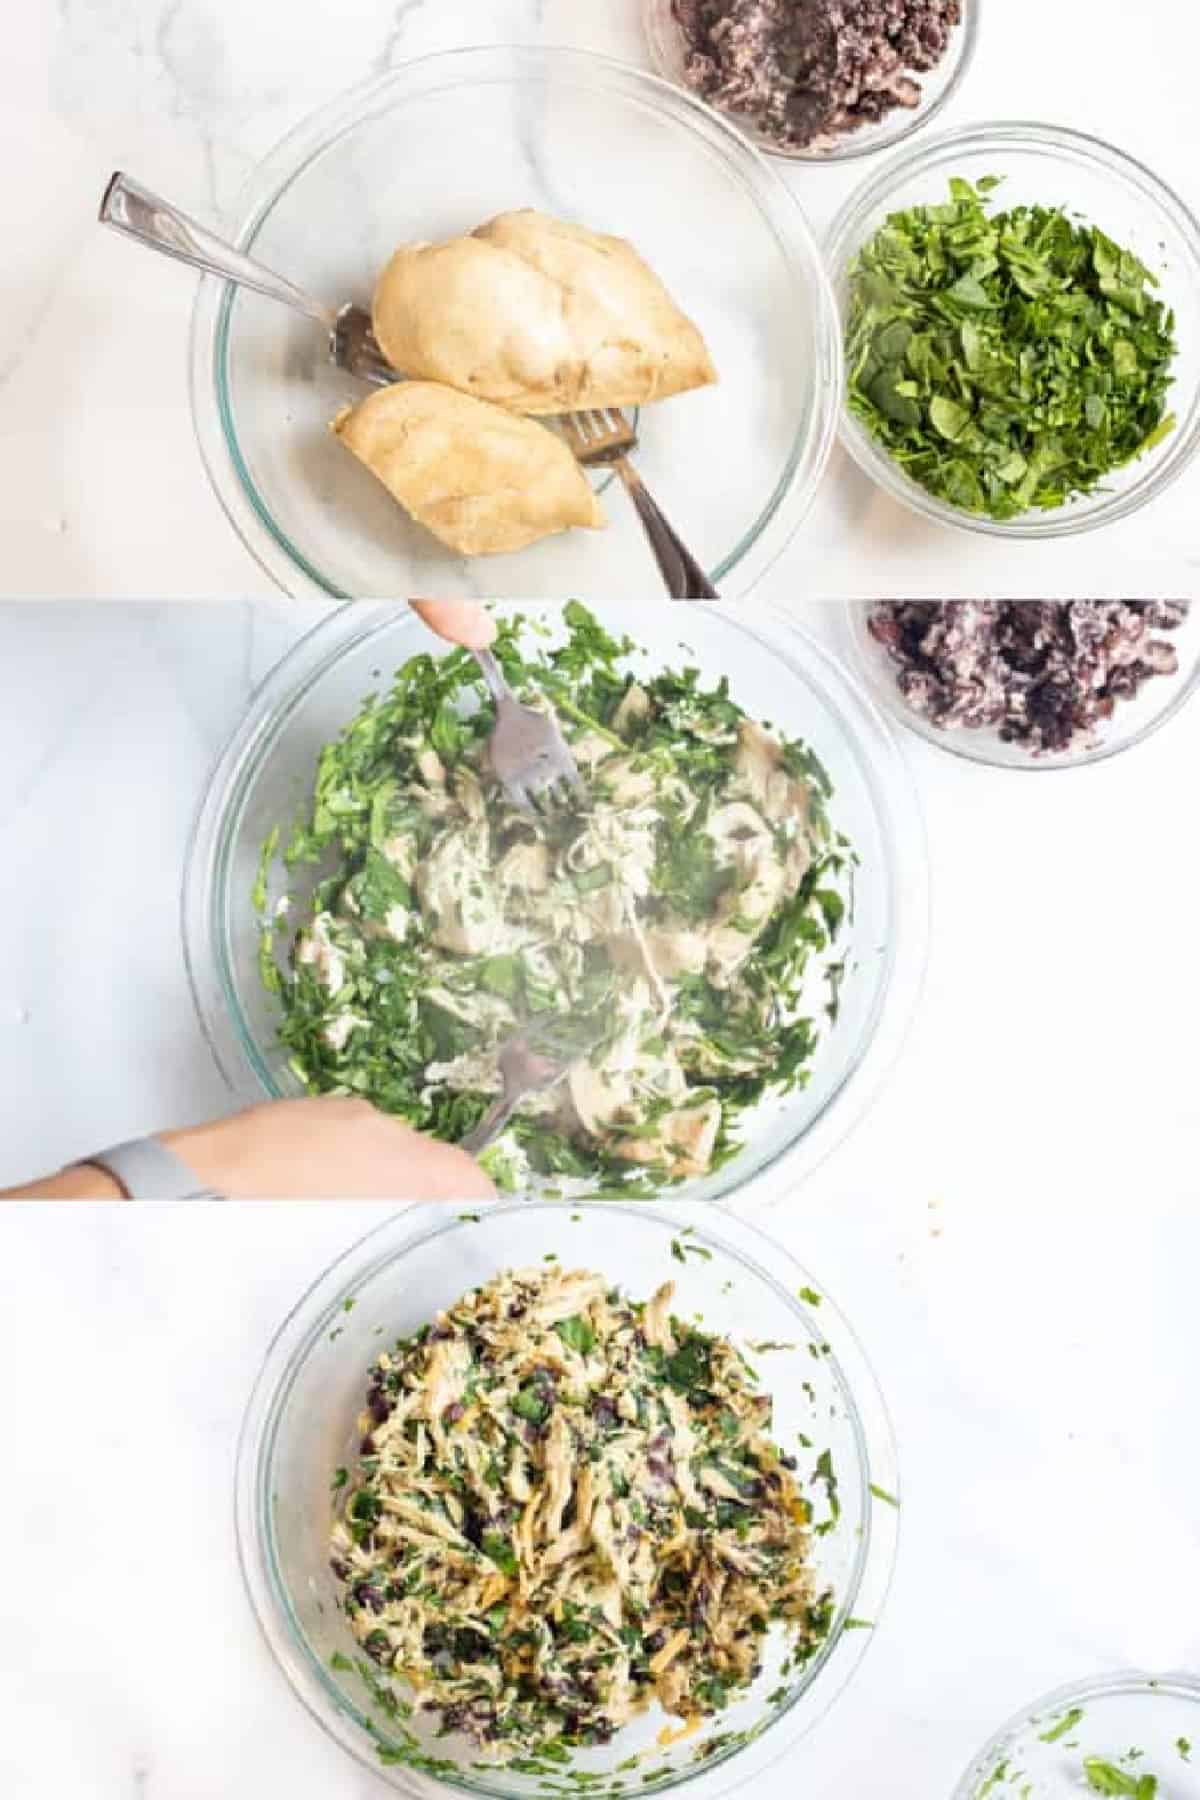 row of pictures, one with a bowl of cooked chicken next to spinach and beans, then two forks shredded it with spinach, and then a bowl of it all mixed together.